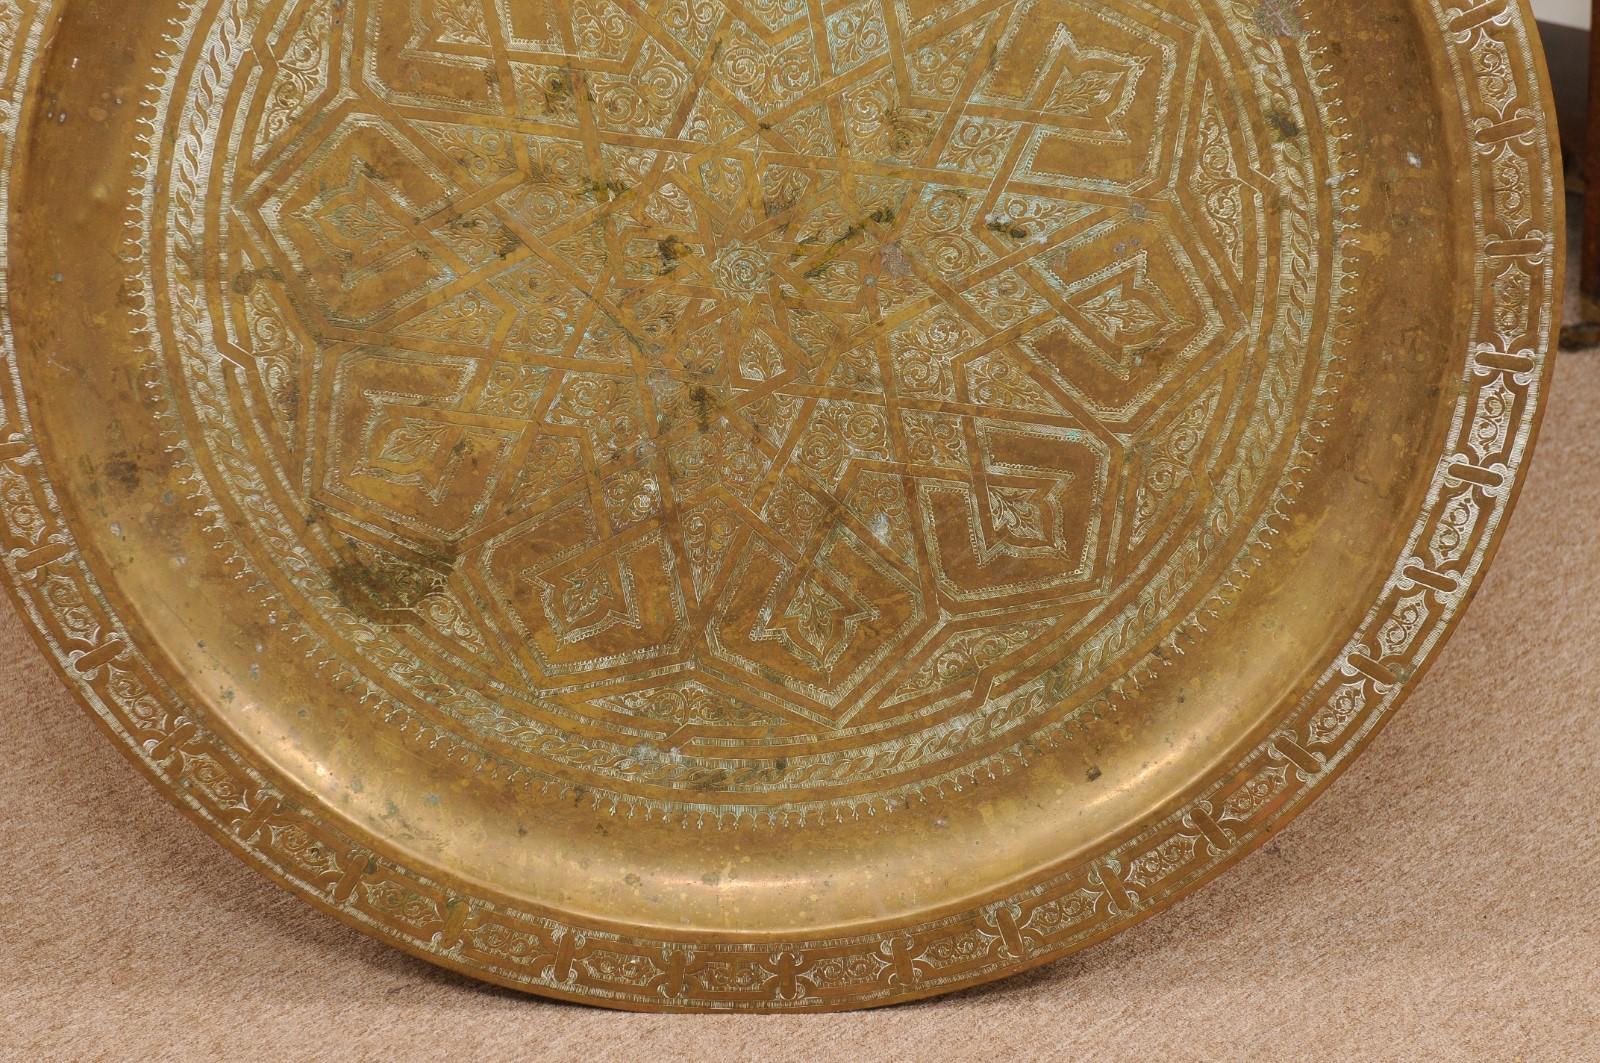 Large, Round, Engraved Brass Tray, Early 20th Century Anglo-Indian In Good Condition For Sale In Atlanta, GA